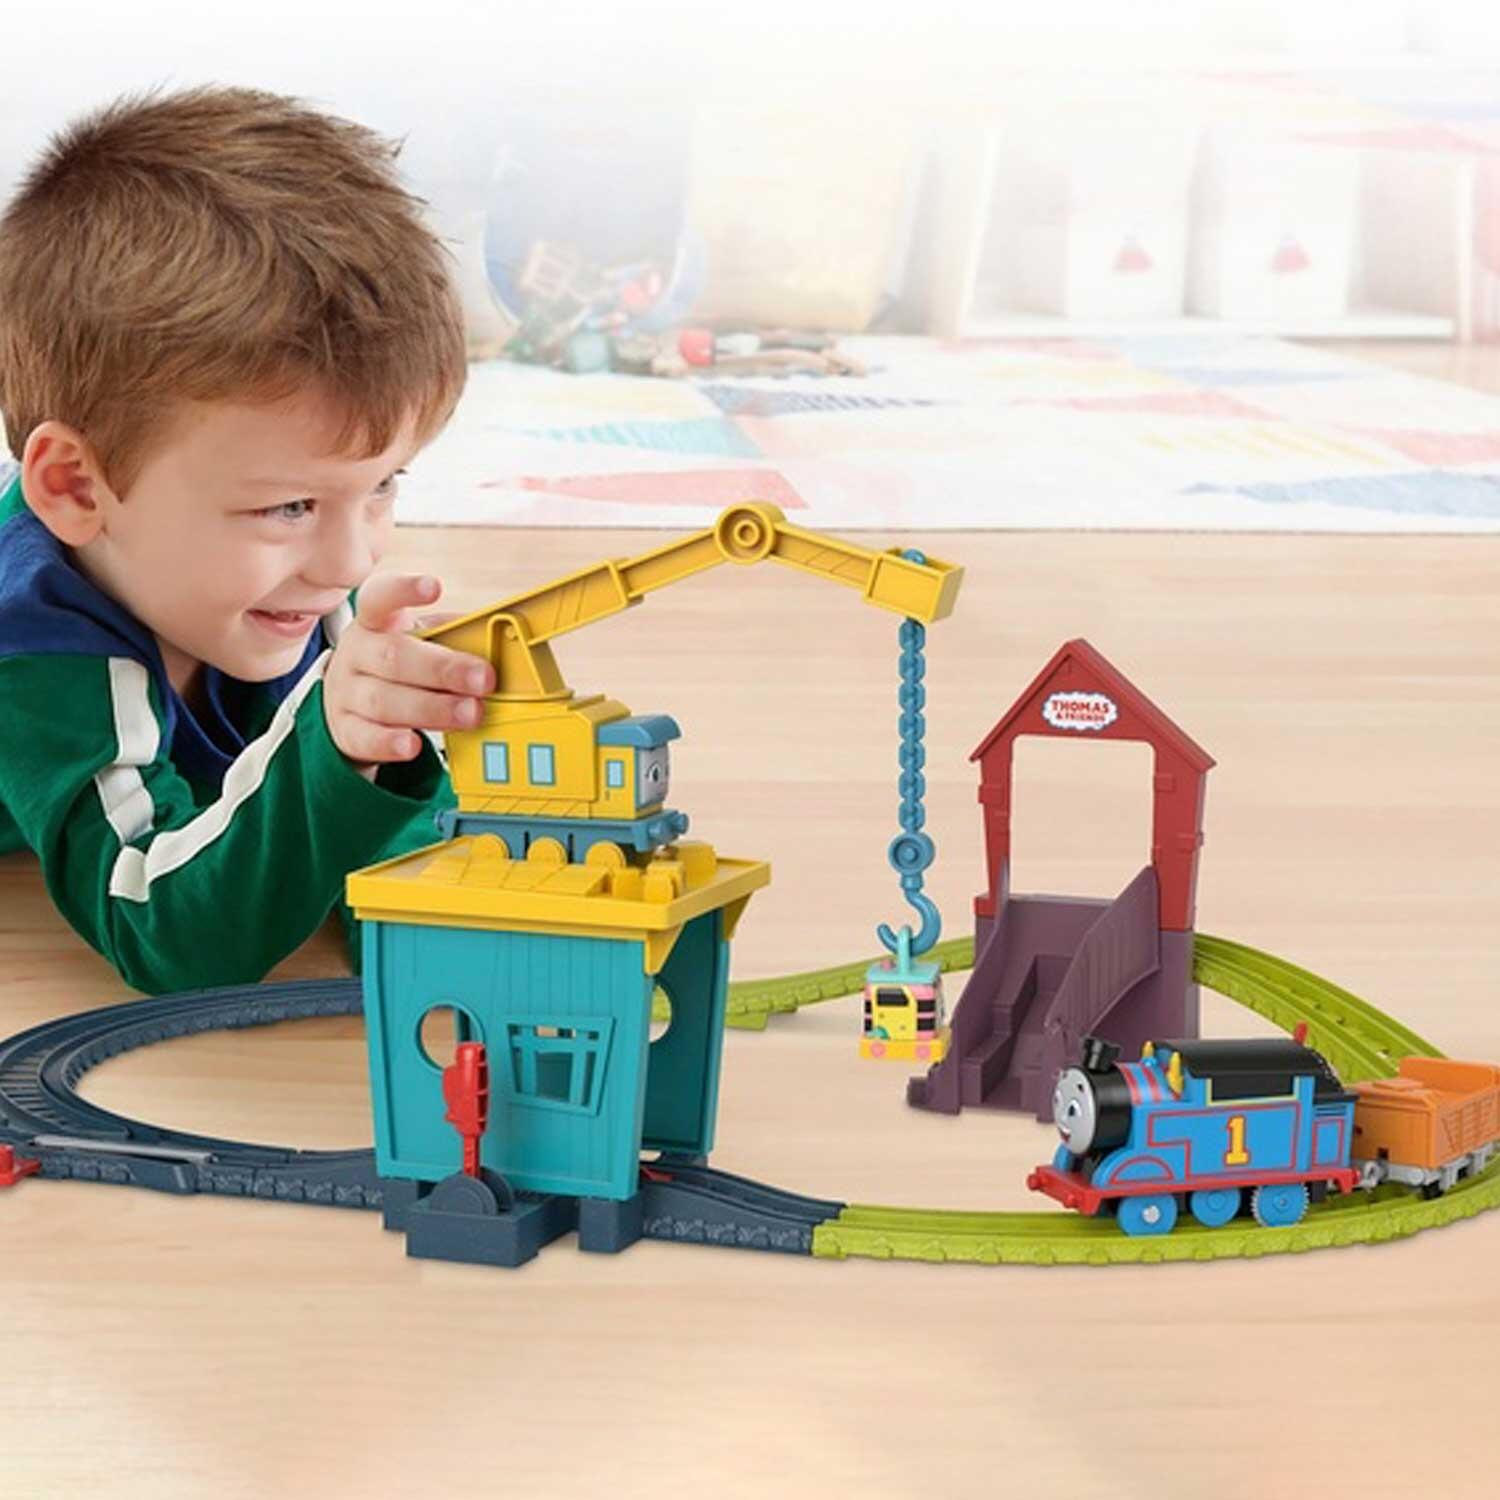 Little Boy Playing With Thomas And Friends Fix 'Em Up Friends Train Set